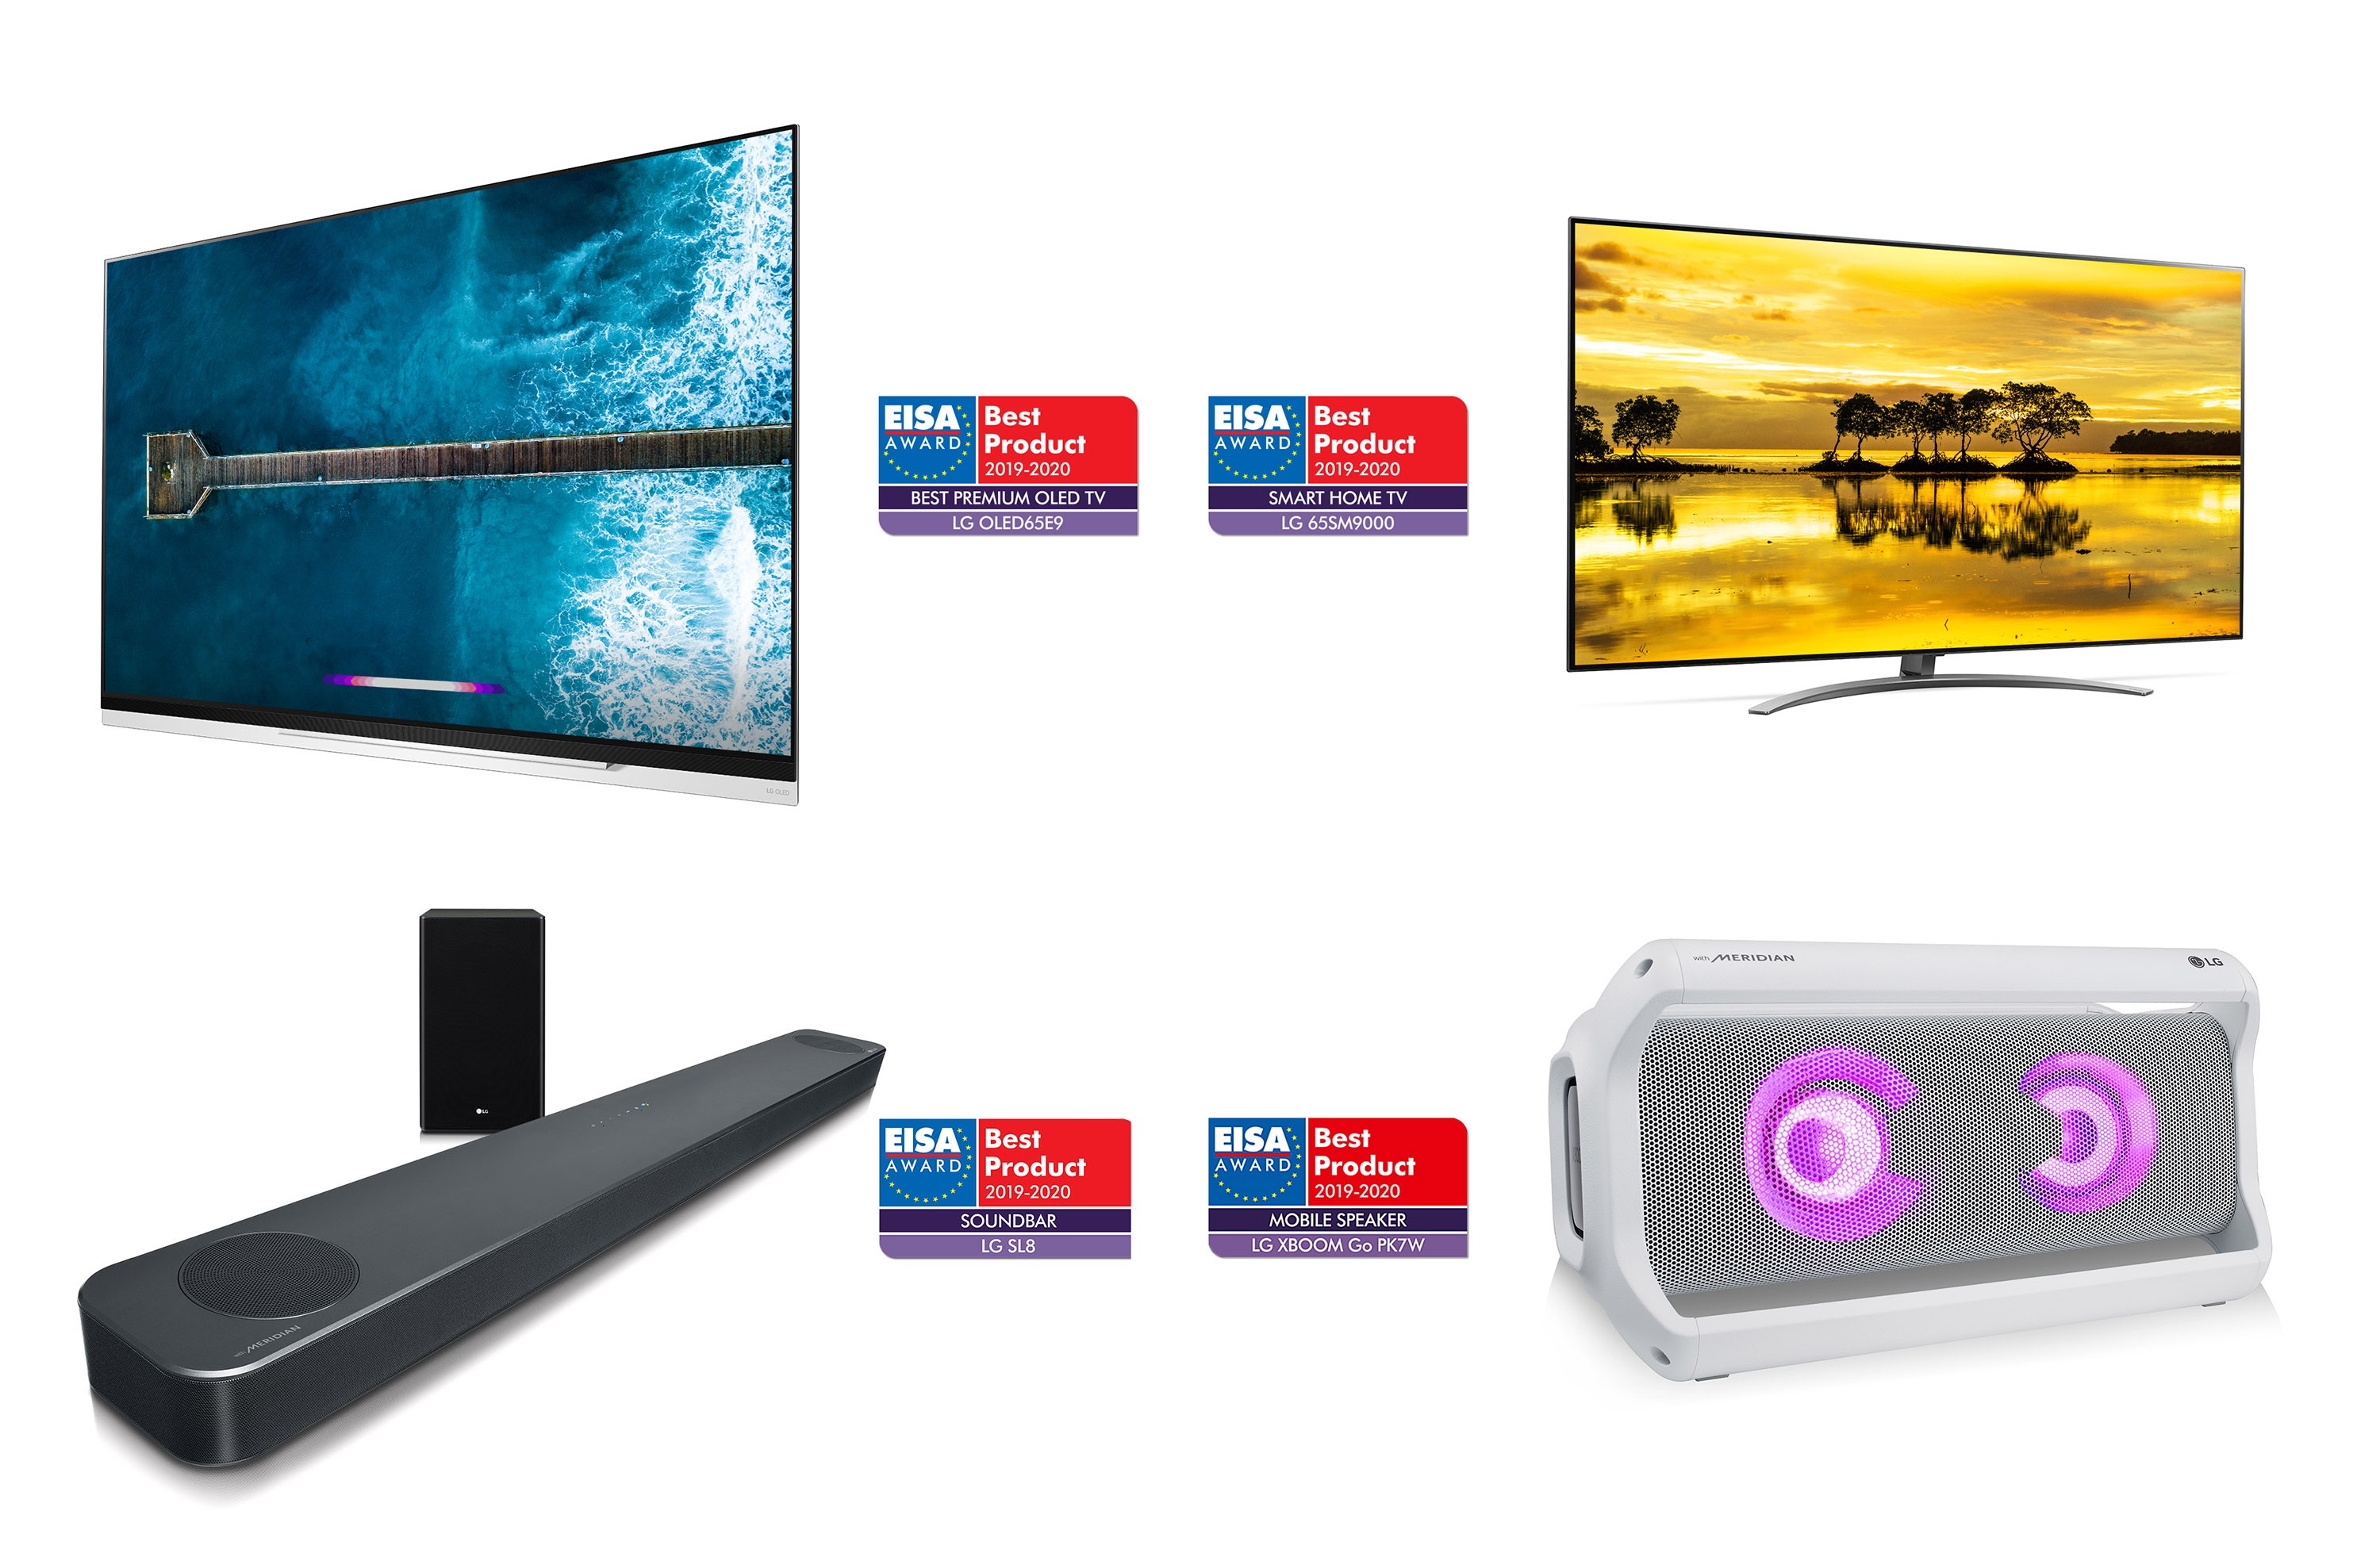 LG'S LATEST AI-ENABLED TV AND INNOVATIONS EARN TOP AT ANNUAL EISA AWARDS | LG NEWSROOM